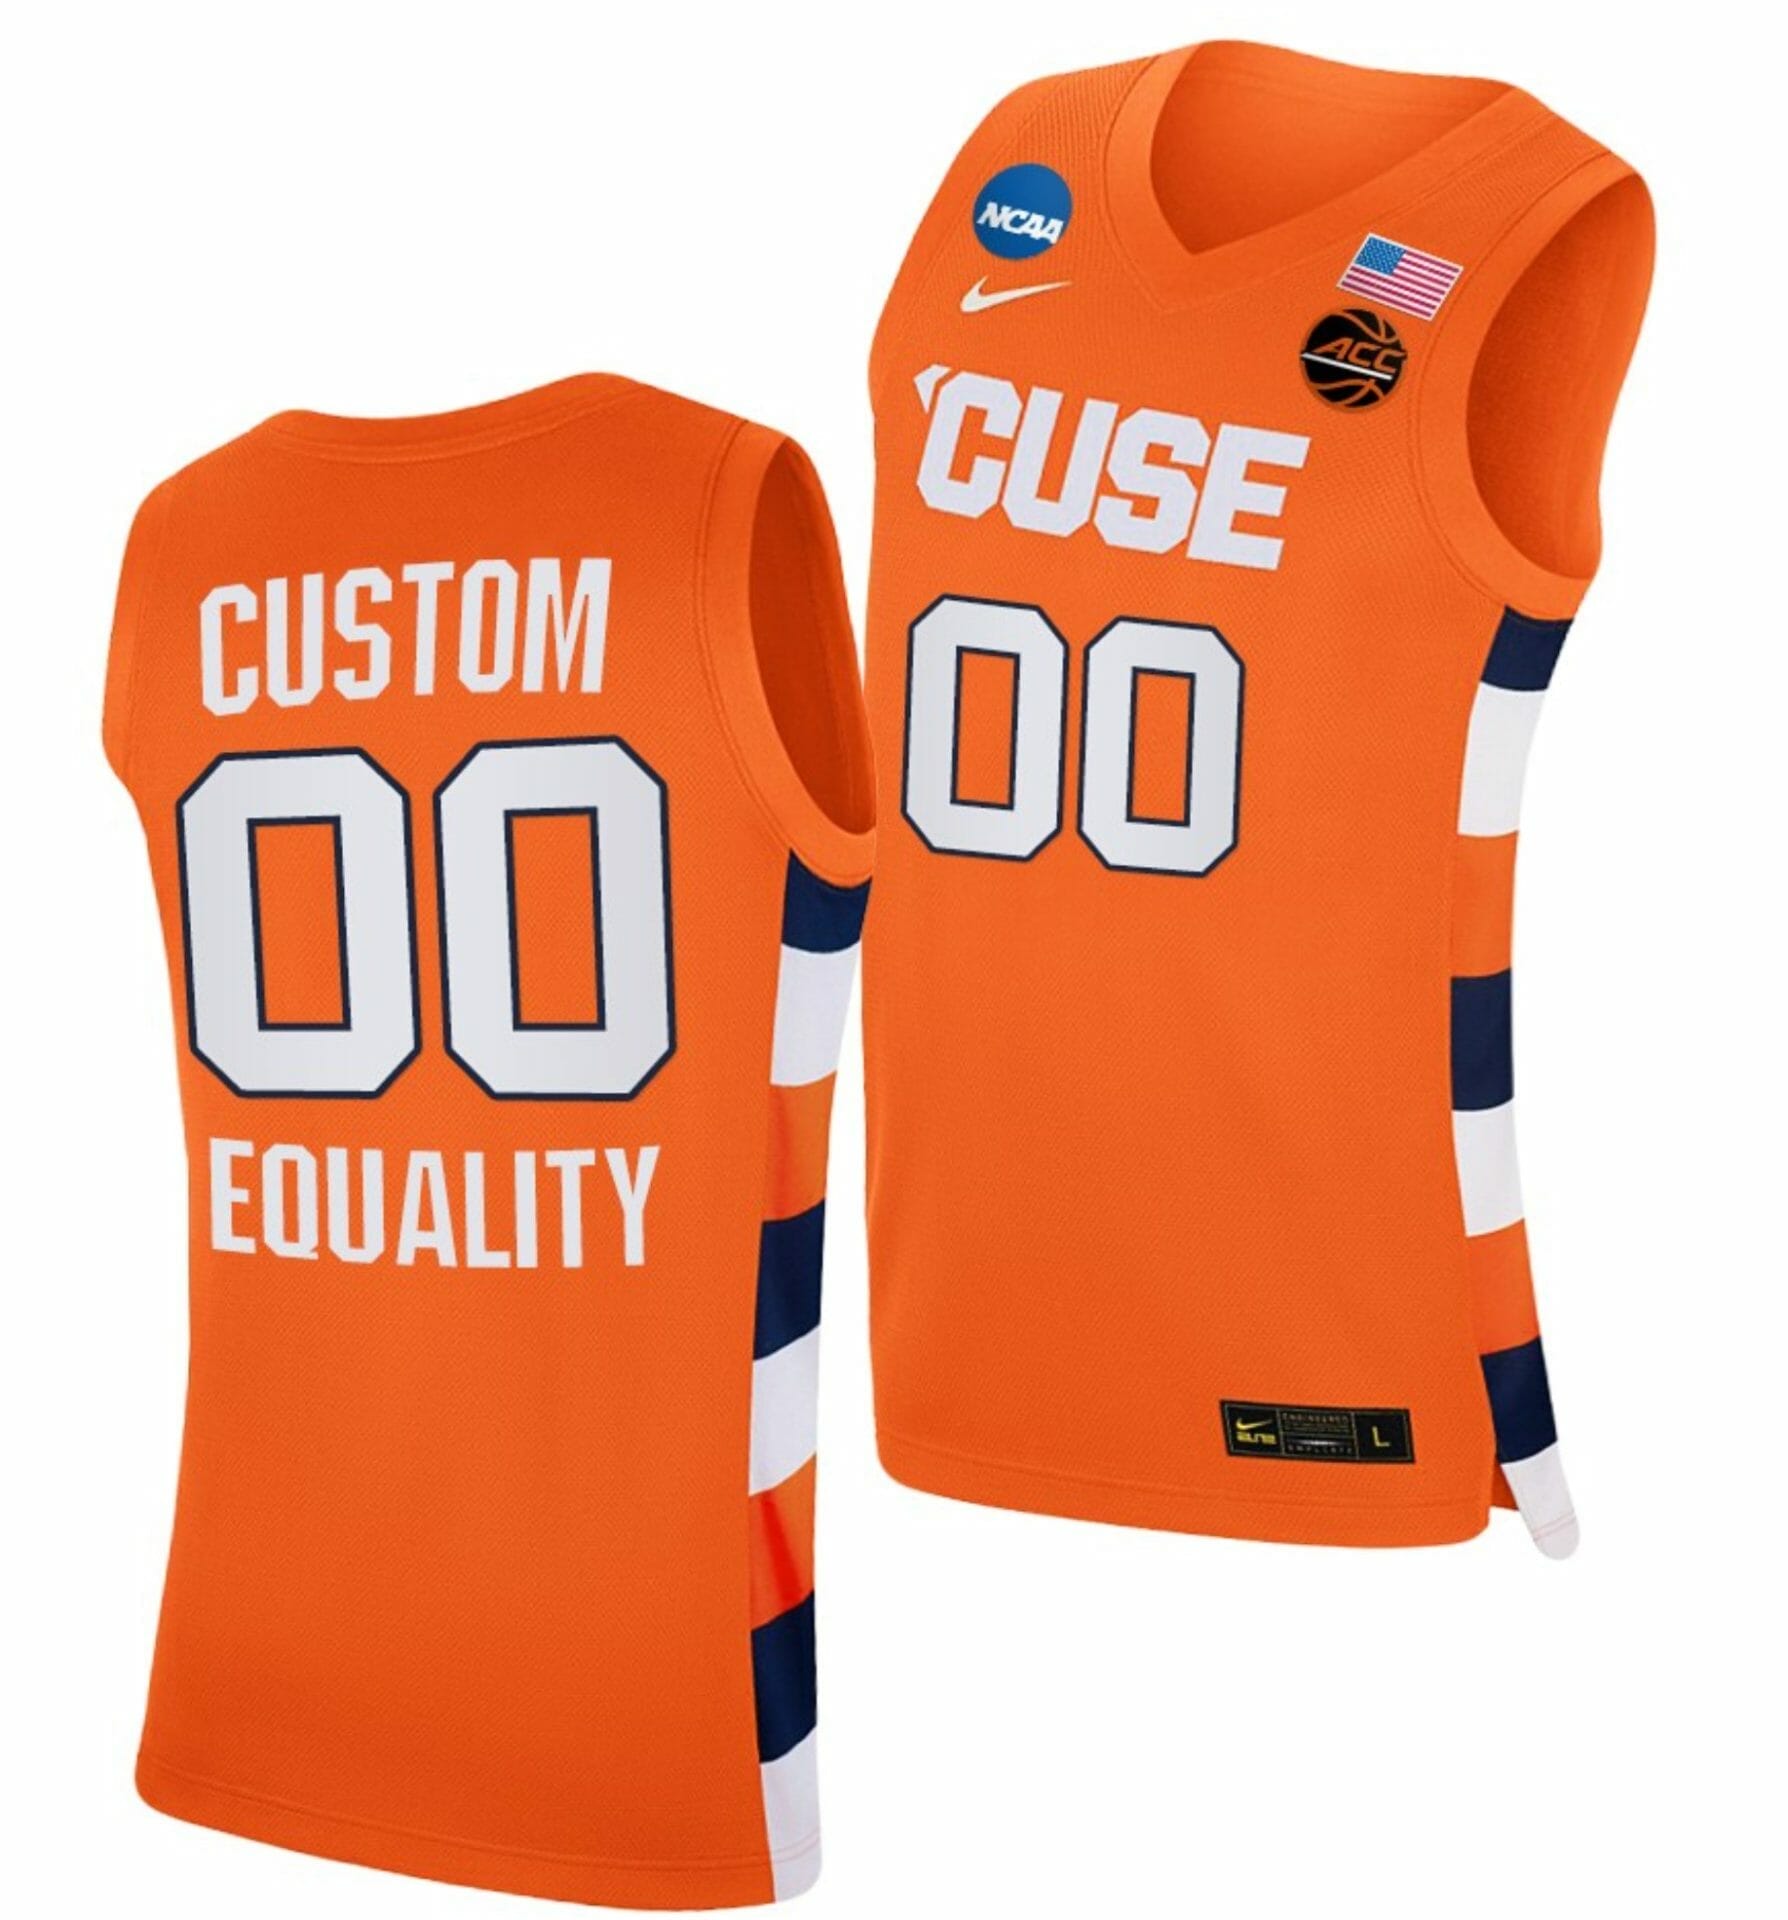 Custom College Basketball Jerseys Syracuse Orange Jersey Name and Number BasketballMarch Madness Sweet 16 Equality White